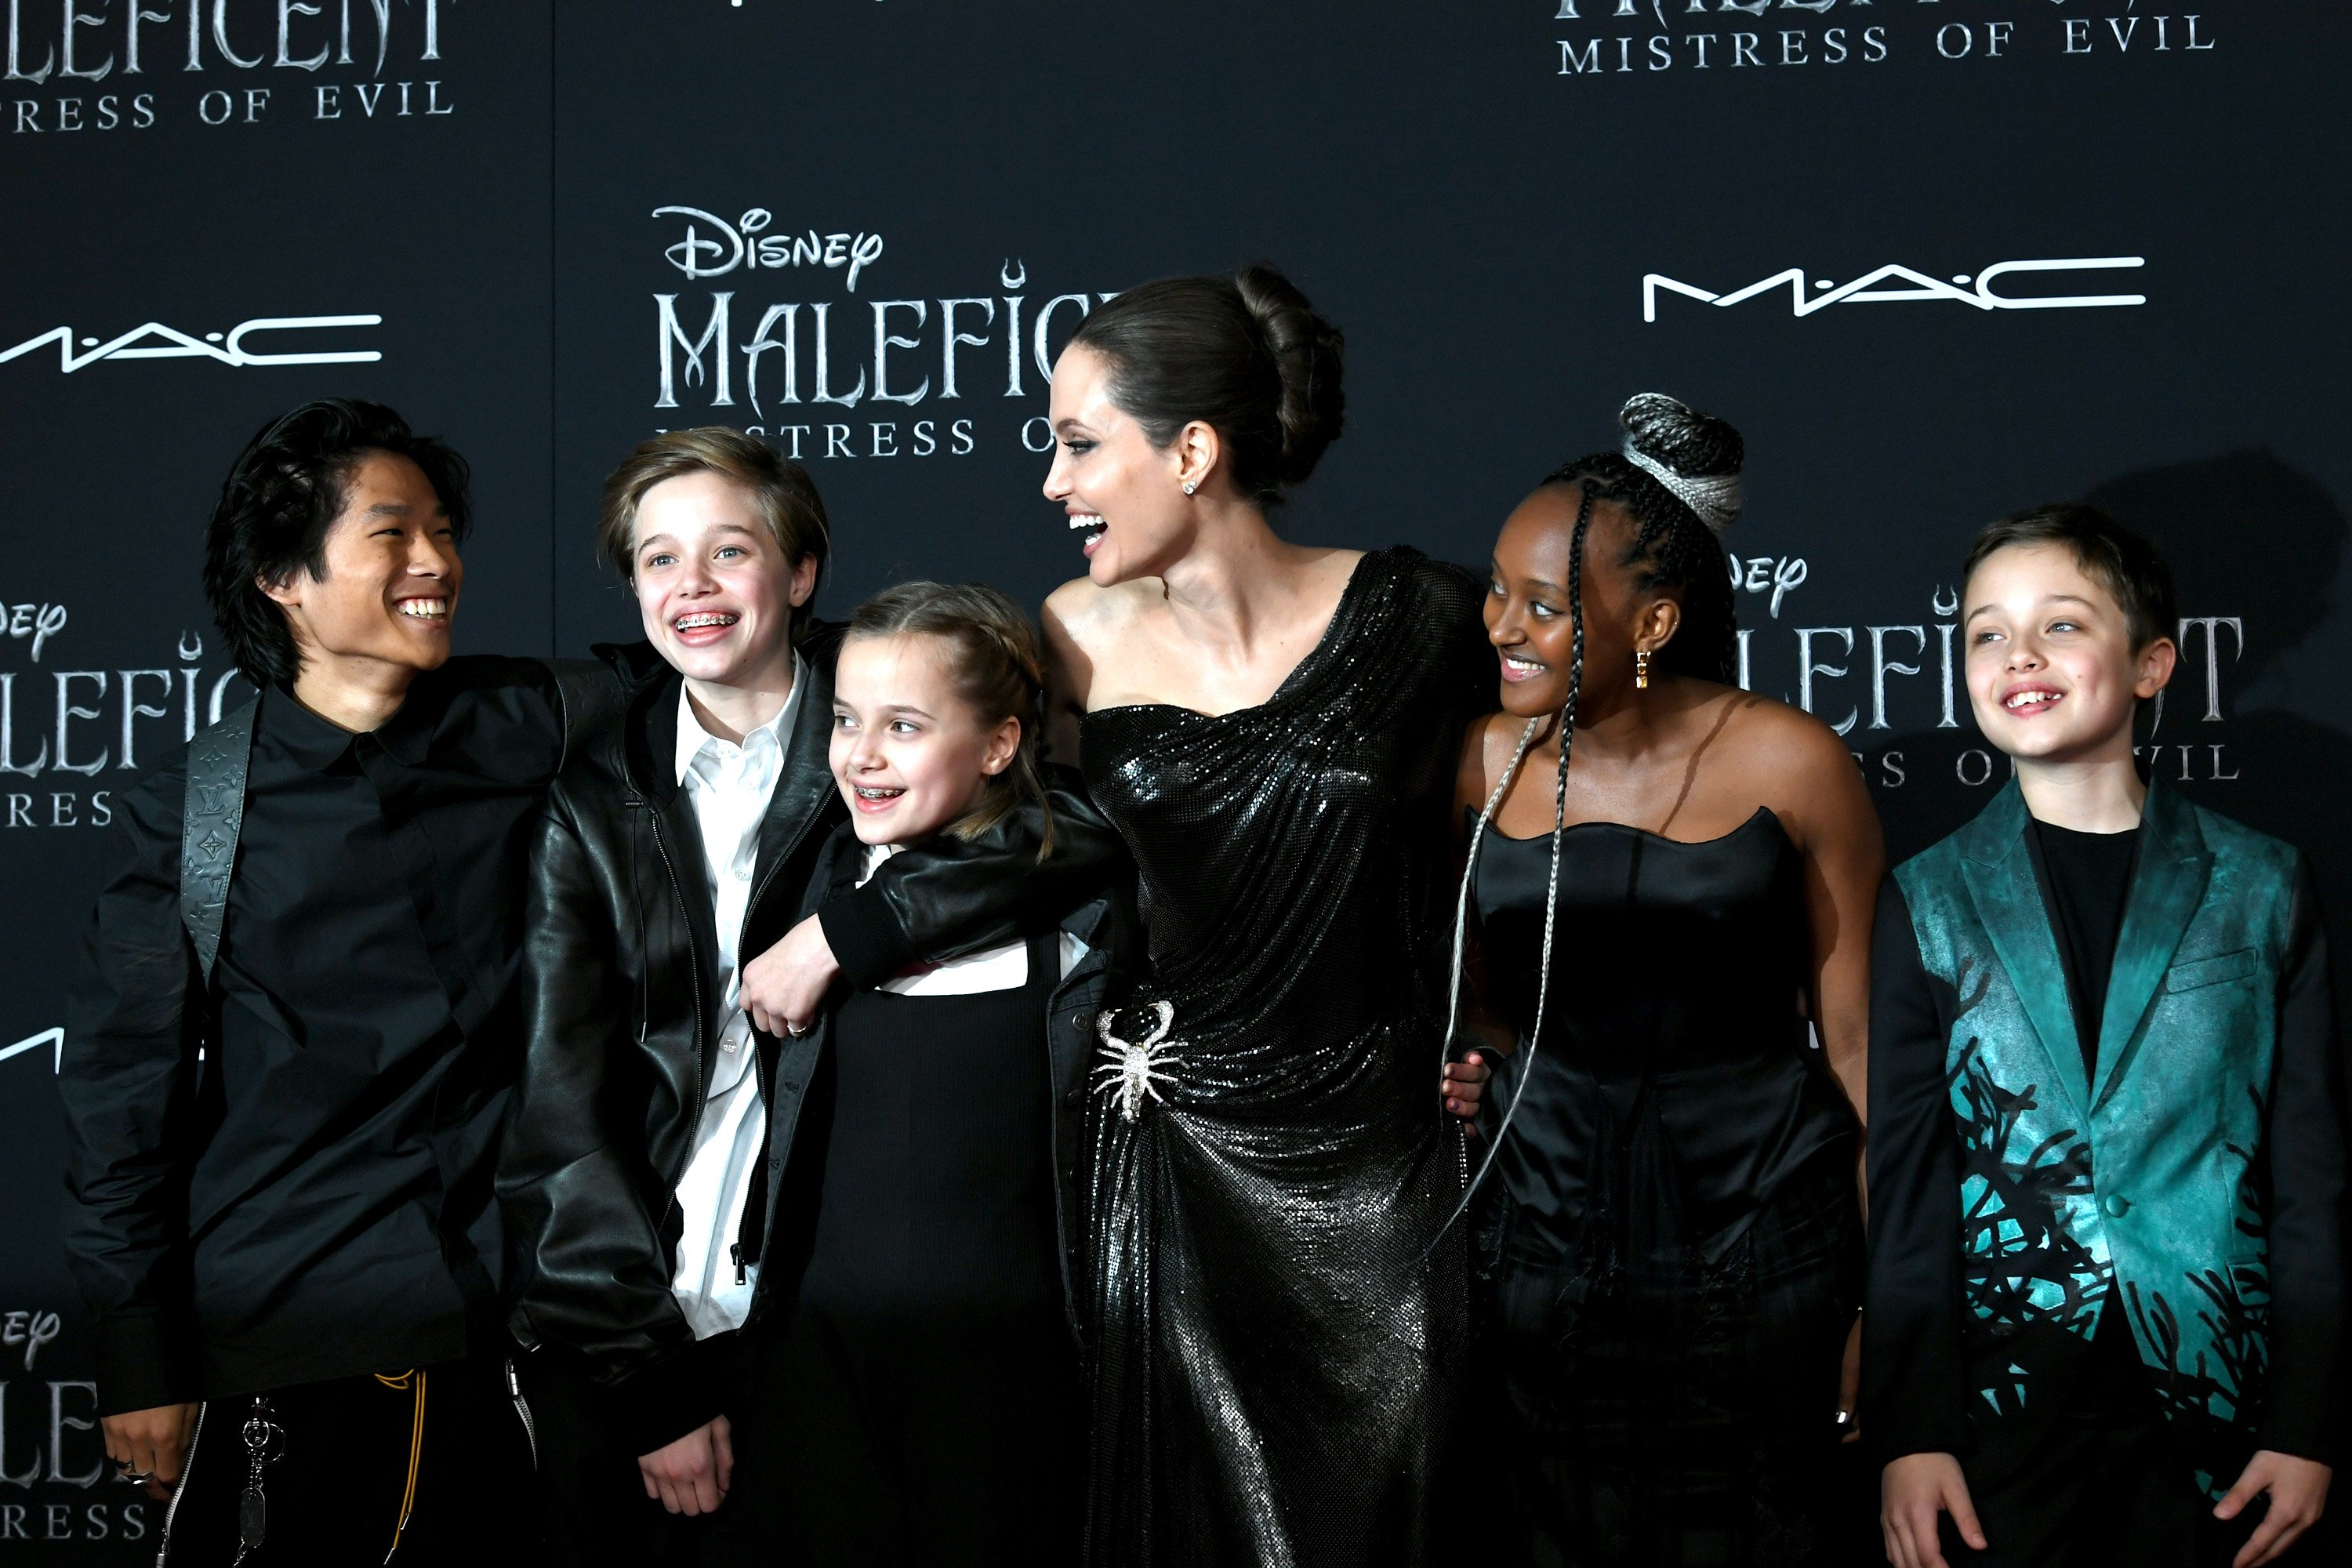 Angelina Jolie and her kids attends the premiere of "Maleficent: Mistress of Evil" in Los Angeles, California on September 30, 2019 | Photo: Getty Images